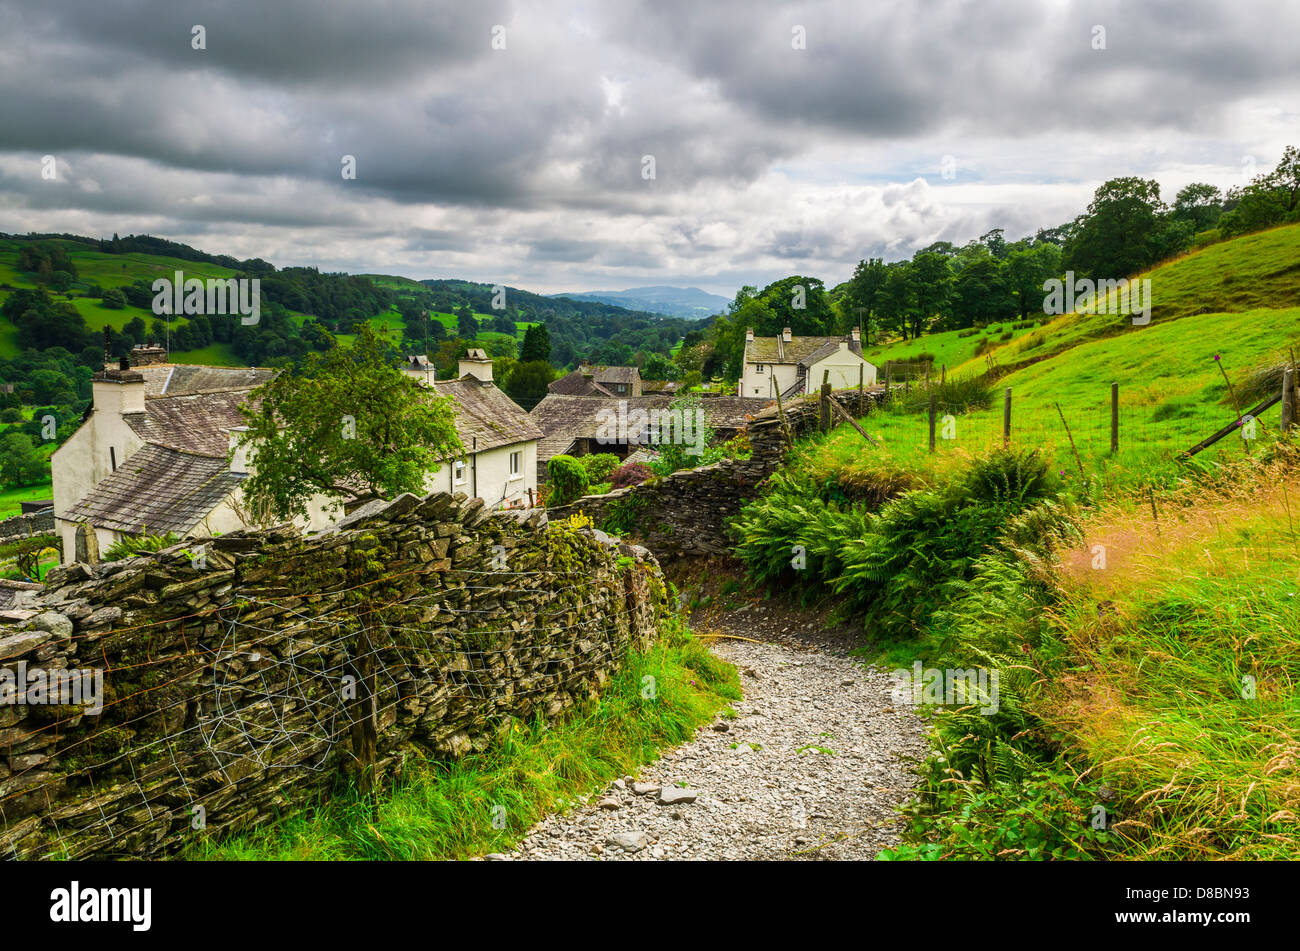 Nanny Lane at Troutbeck in the Lake District, near Windermere, Cumbria, England. Stock Photo